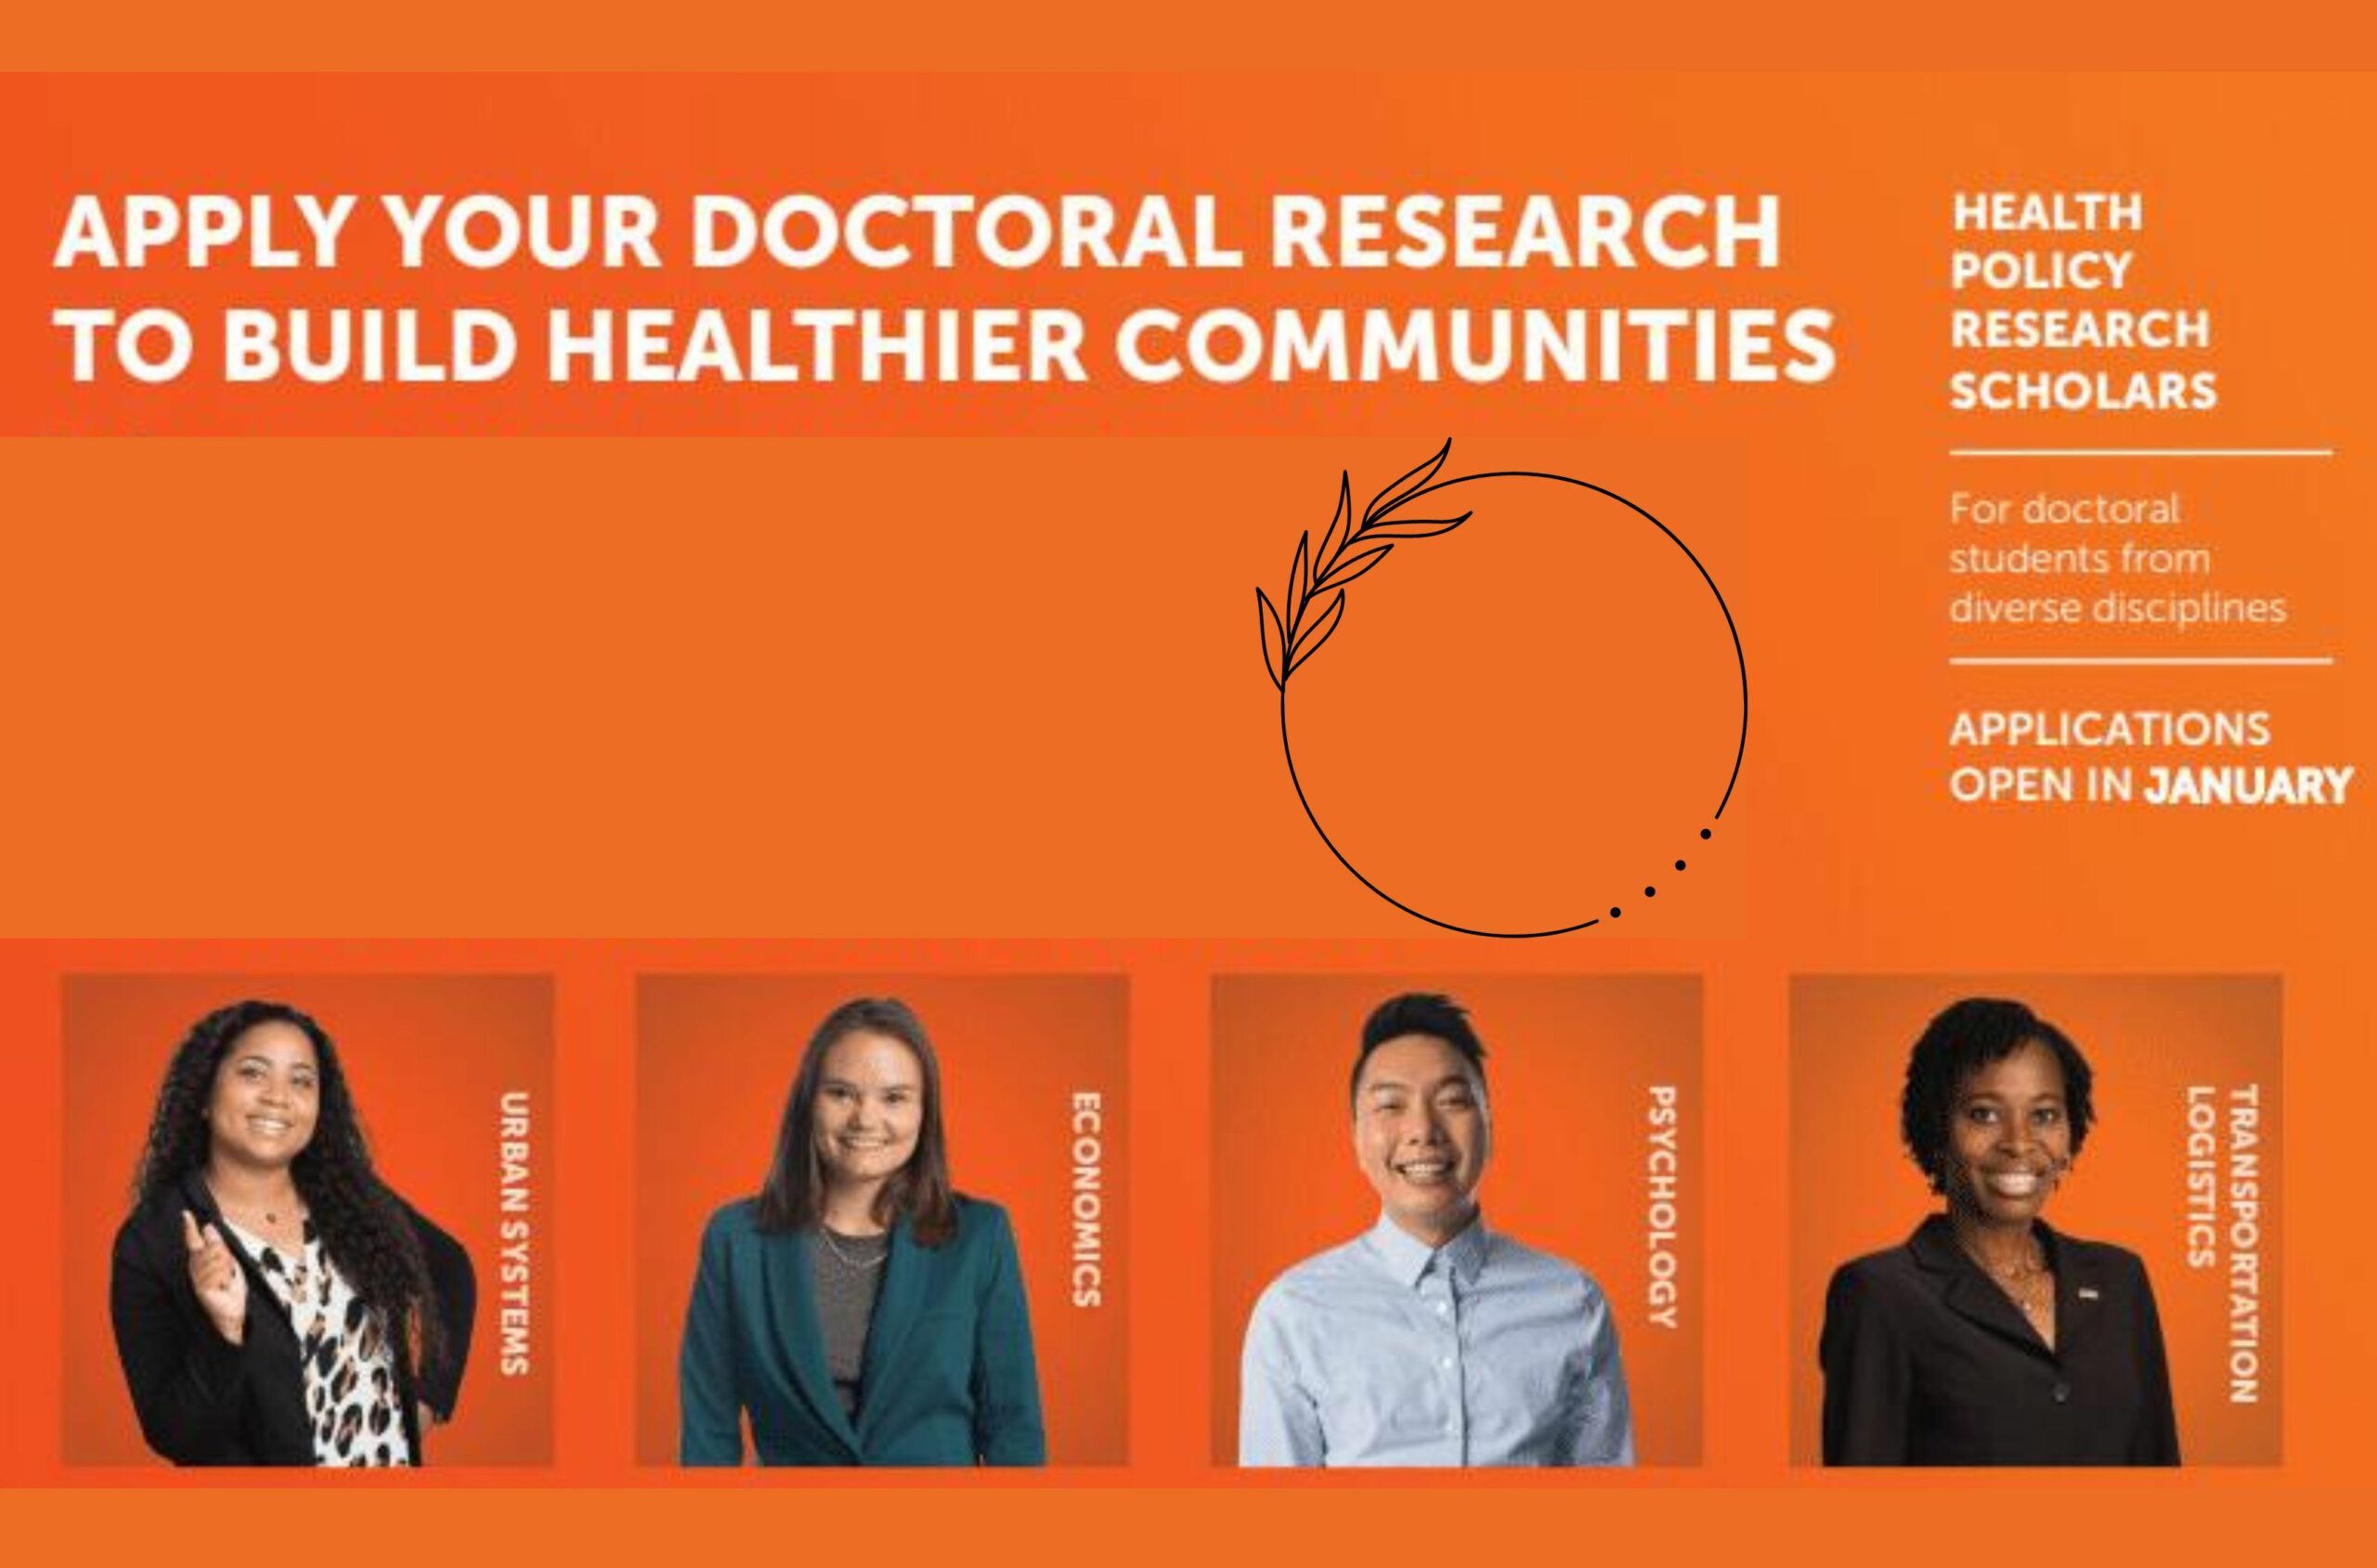 Health policy research scholars 2023 - Youth Opportunities